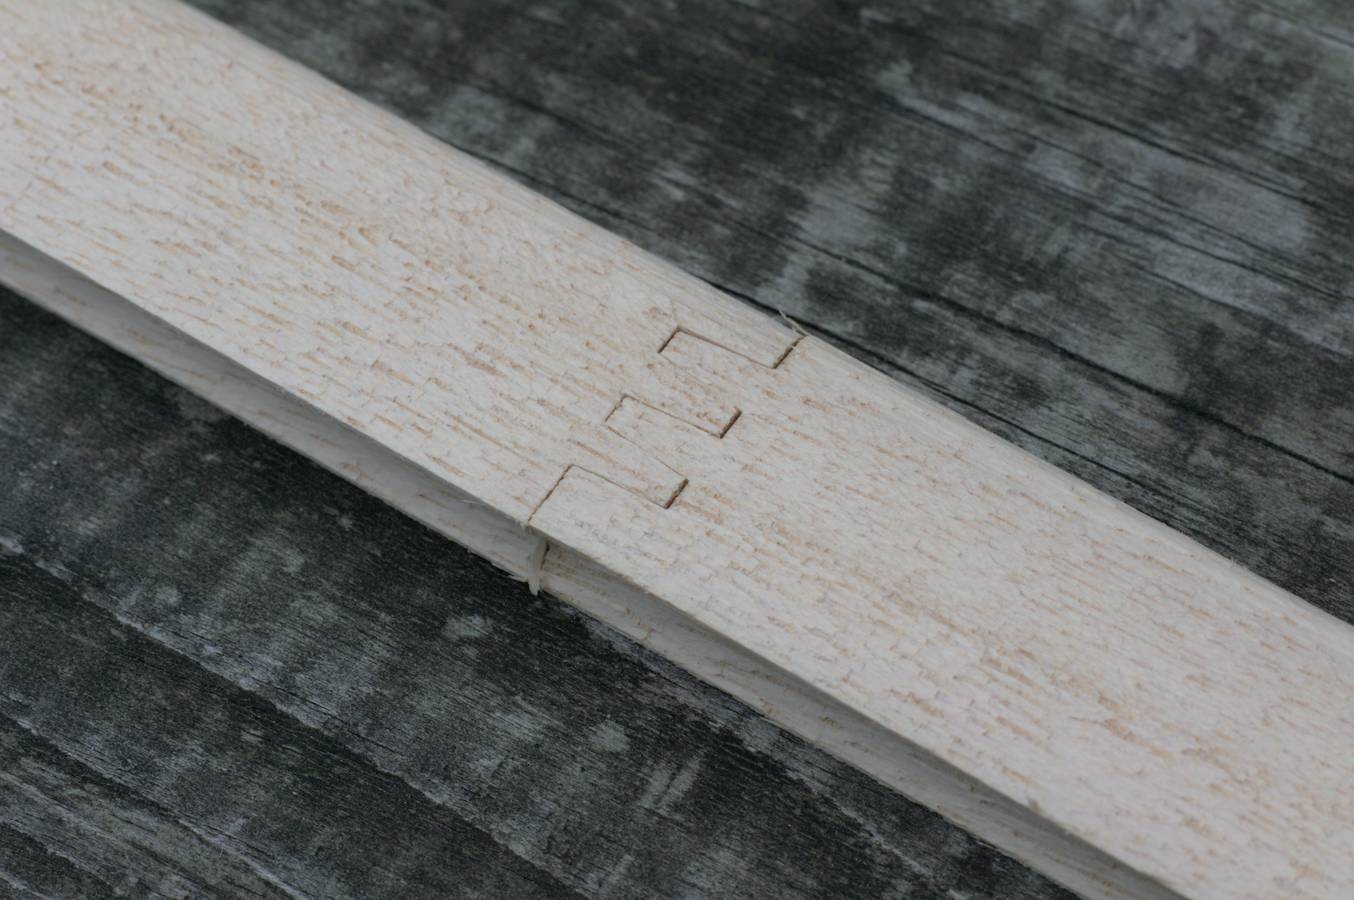 Finger-jointed paulownia strips for neat joining on the boat